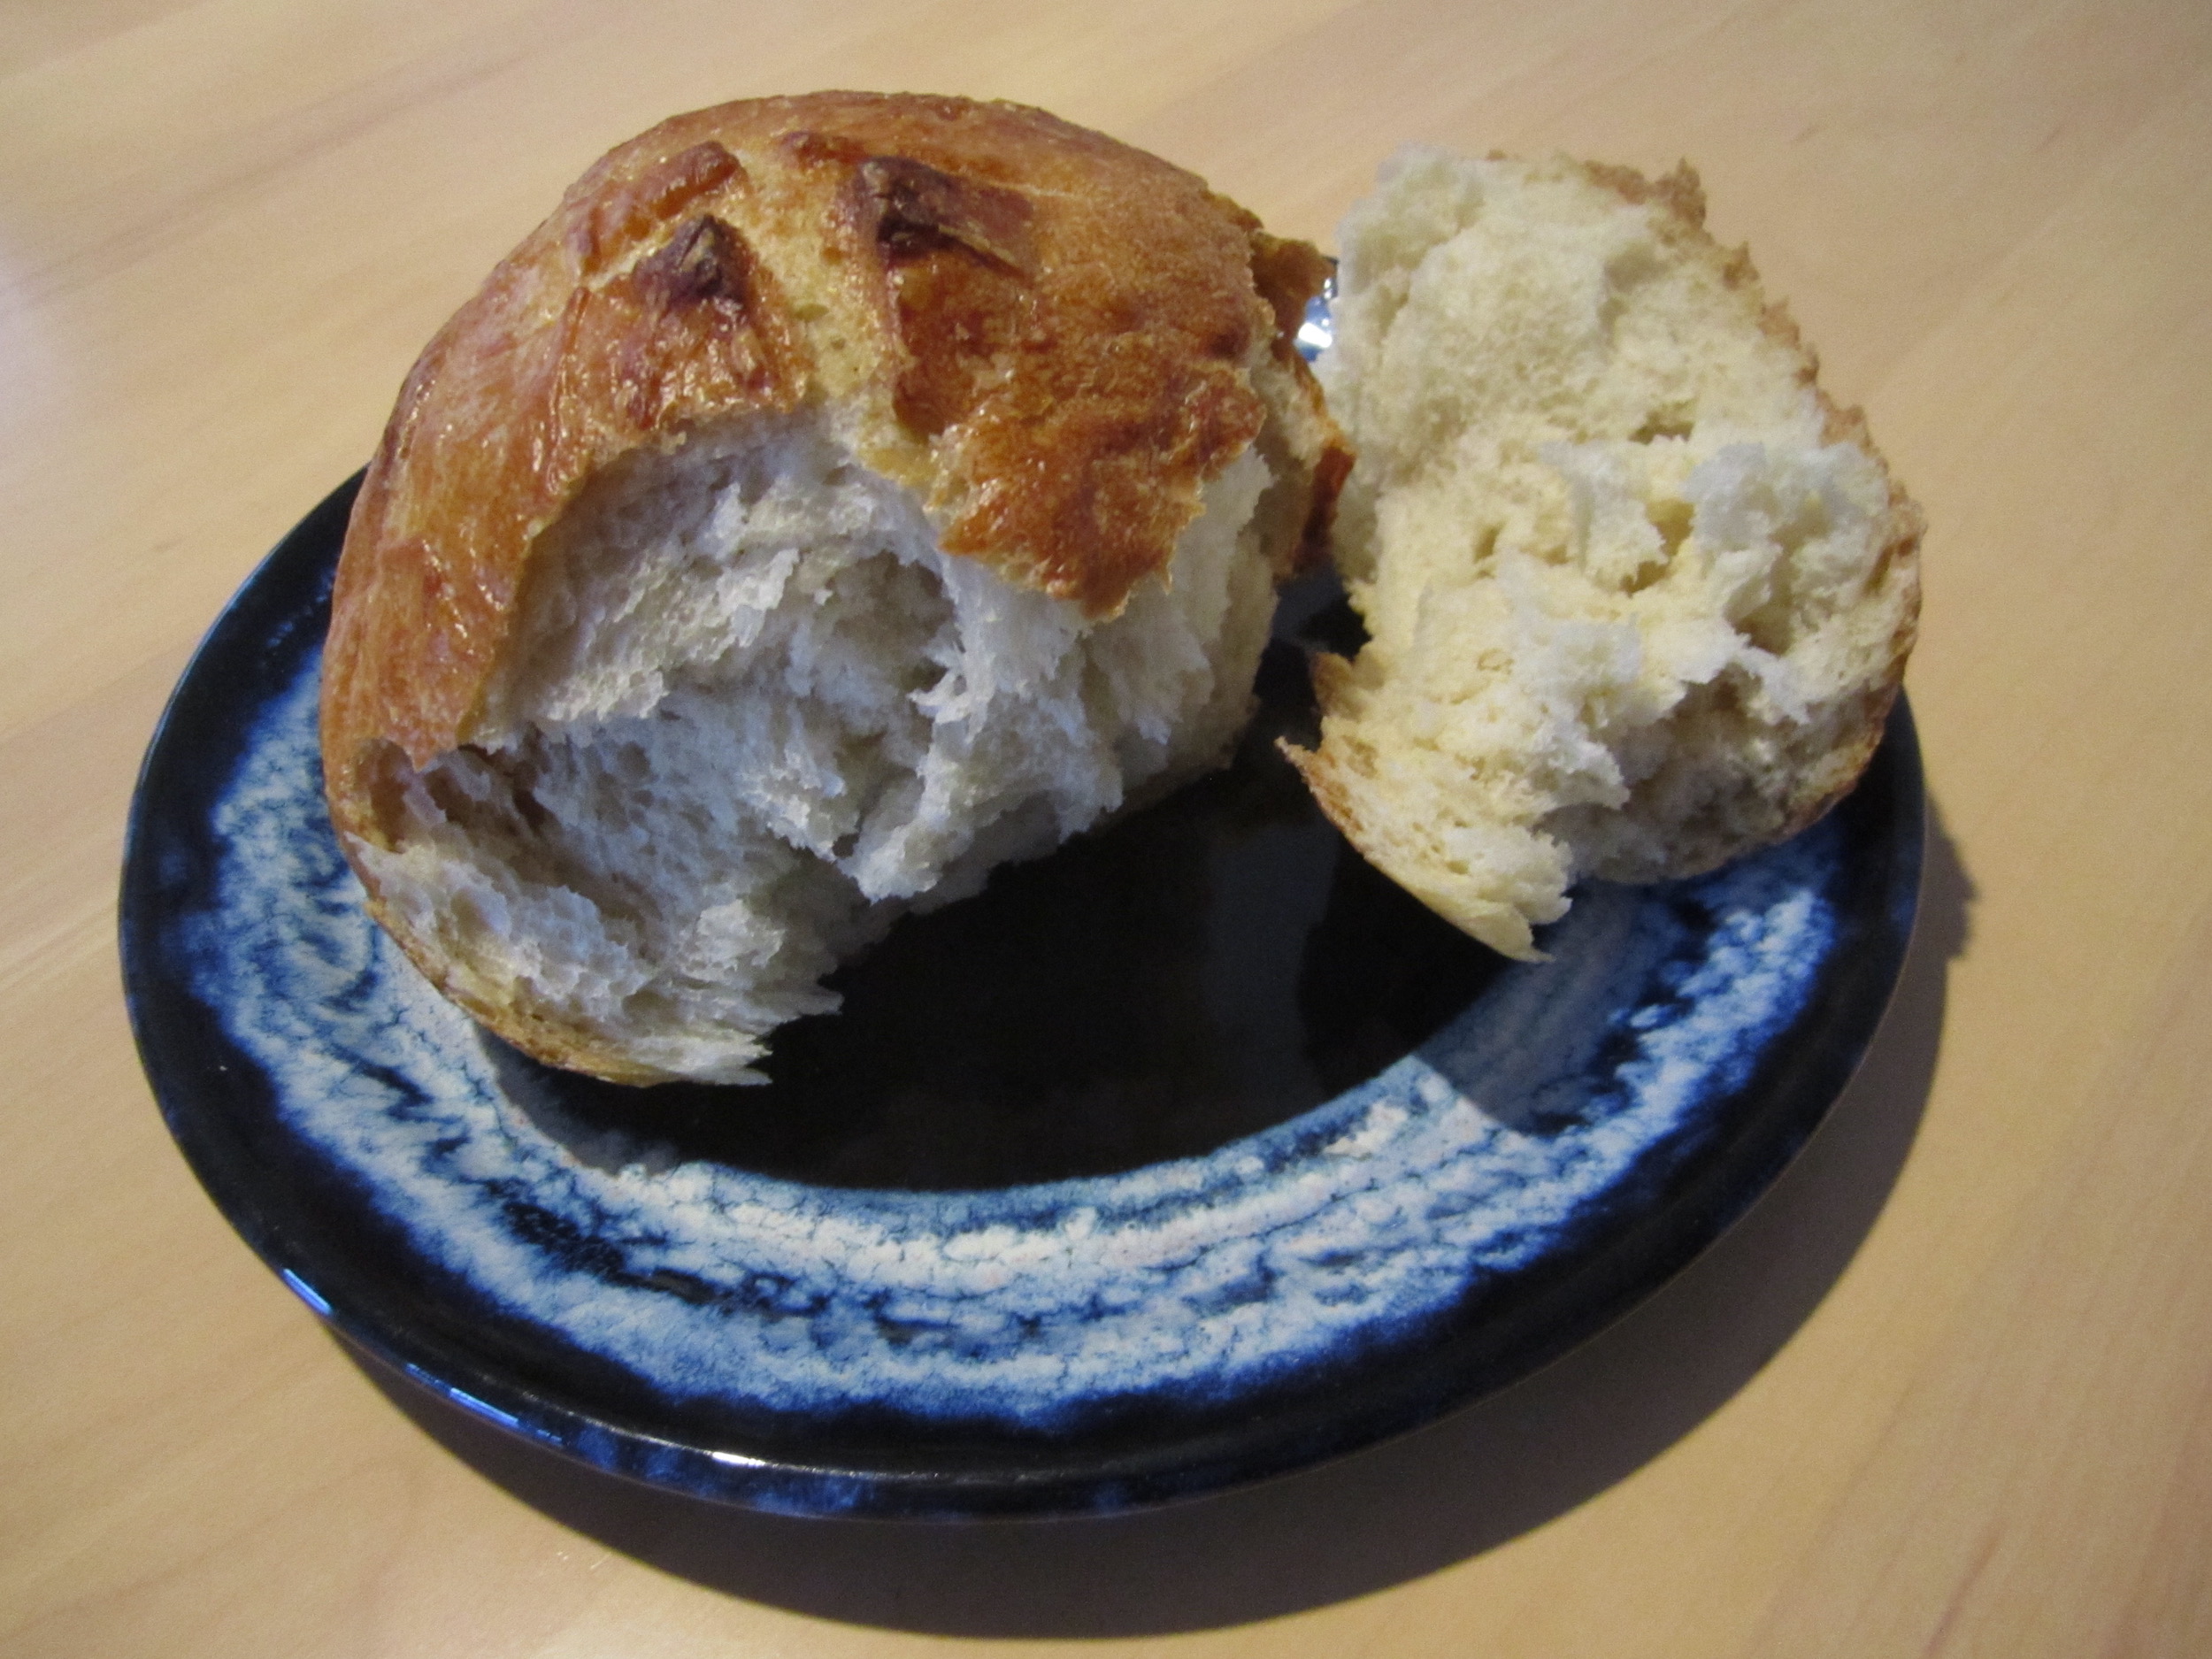 Small, crusty, round roll of white bread, broken, sitting on blue plate